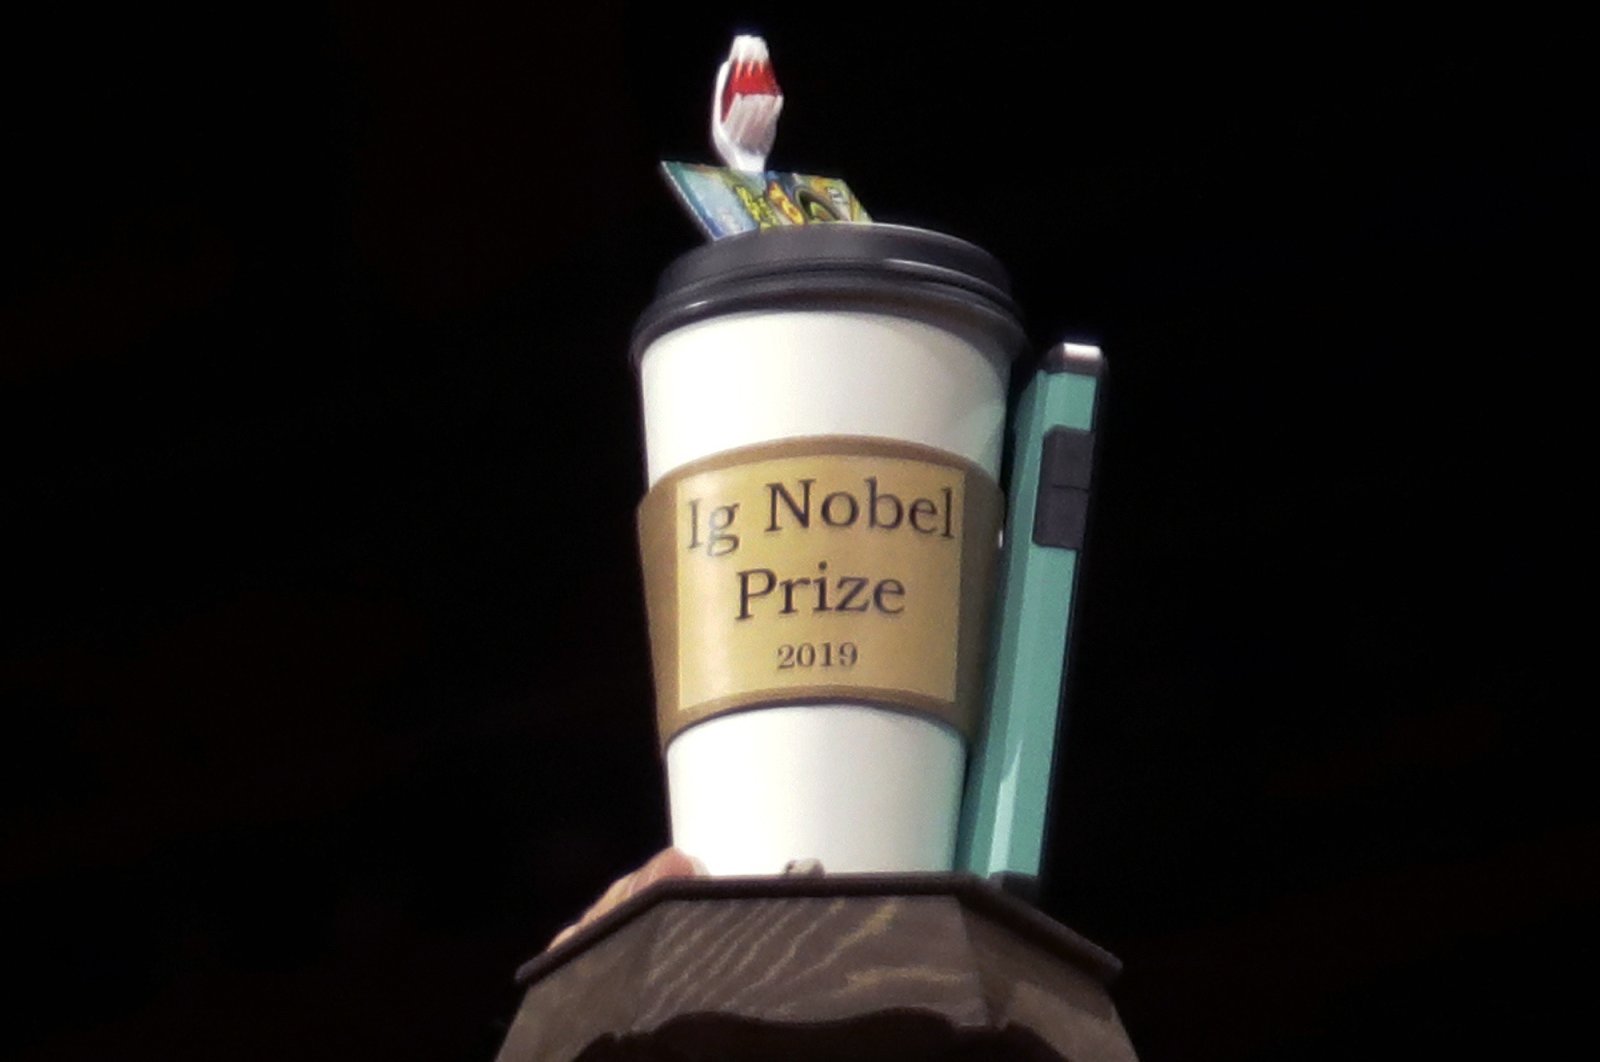 The 2019 Ig Nobel award is displayed at the 29th annual Ig Nobel awards ceremony at Harvard University in Cambridge, Massachusetts, U.S., Sept. 12, 2019. The spoof prizes for weird and sometimes head-scratching scientific achievement will be presented online in 2021 due to the coronavirus pandemic. (AP Photo/Elise Amendola, File)